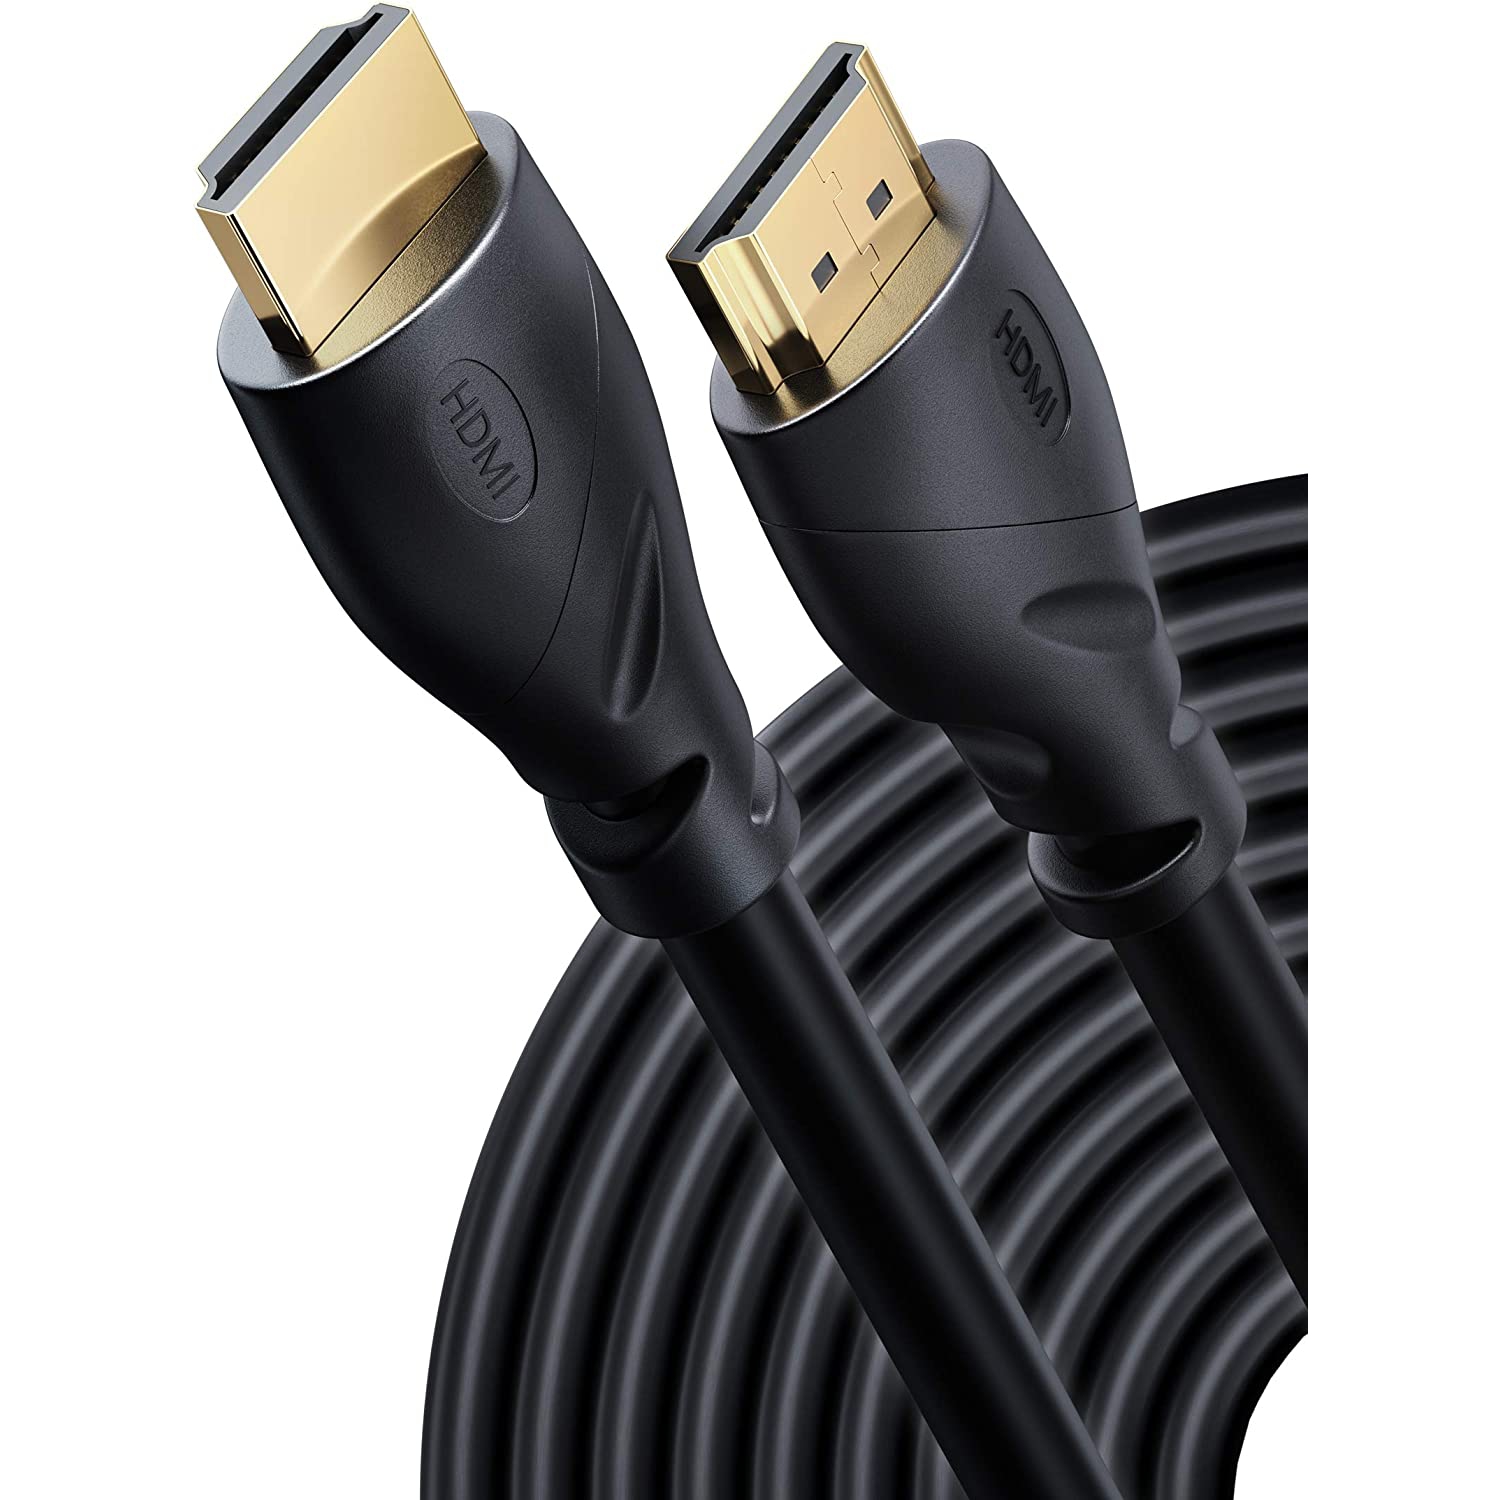 PowerBear 4K HDMI Cable 50 ft | High Speed, Rubber & Gold Connectors, 4K @ 60Hz, Ultra HD, 2K, 1080P, & ARC Compatible for Laptop, Monitor, PS5, PS4, Xbox One, Apple TV & More